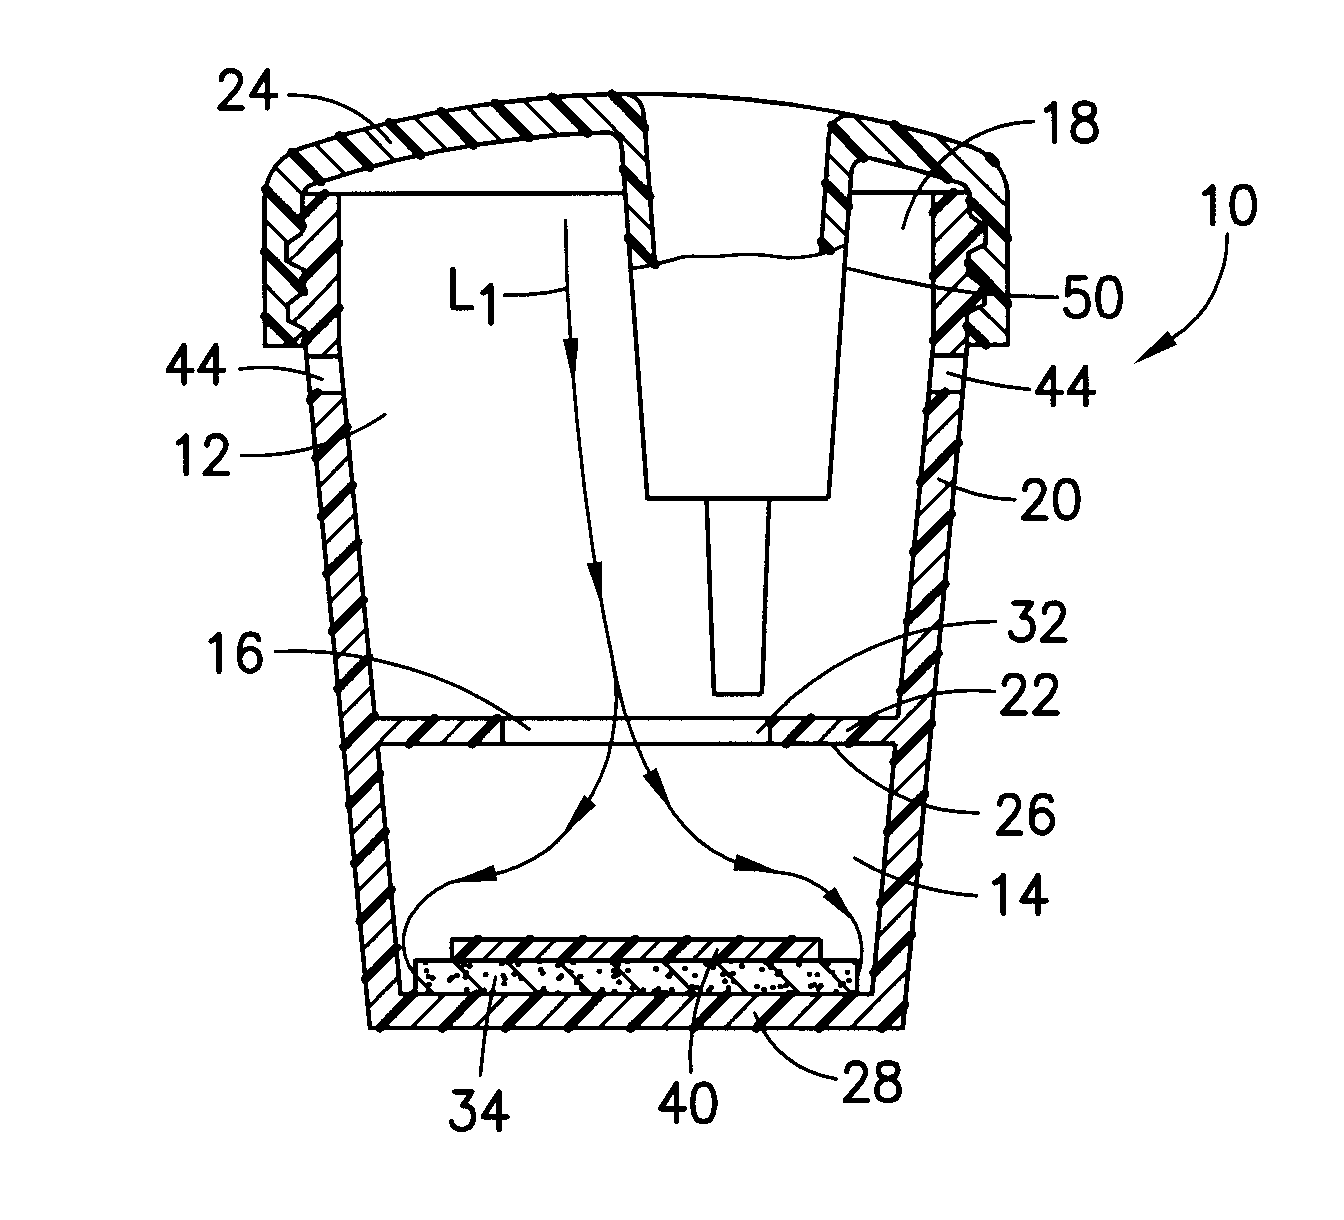 Specimen Collection Container Having a Fluid Separation Chamber